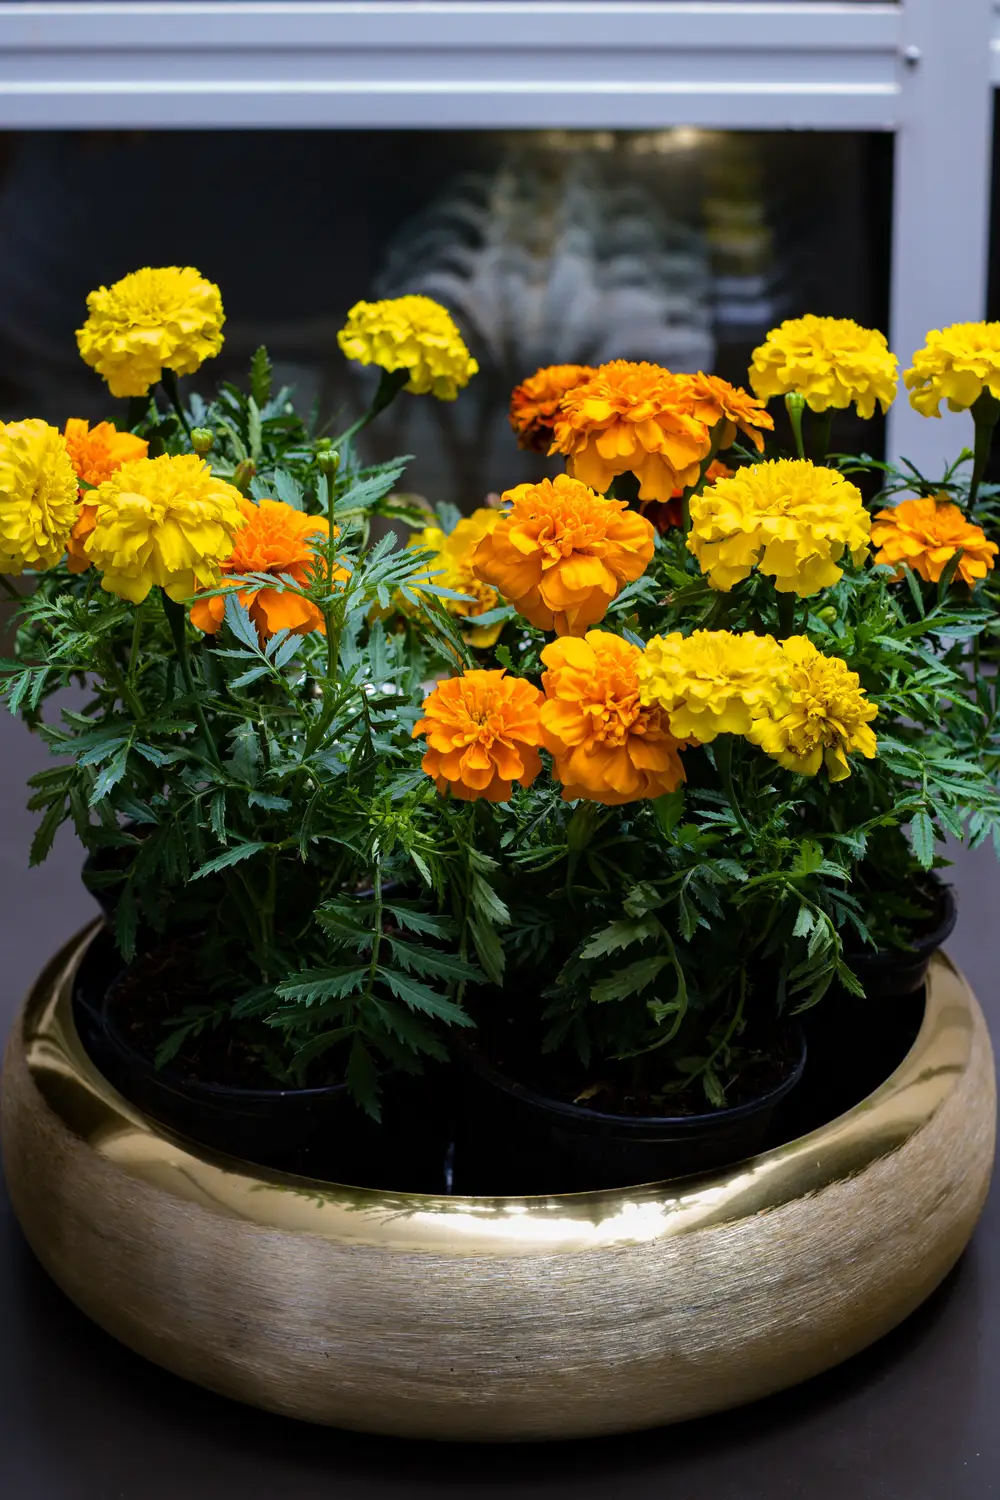 Orange flowers with green leaves in a vase